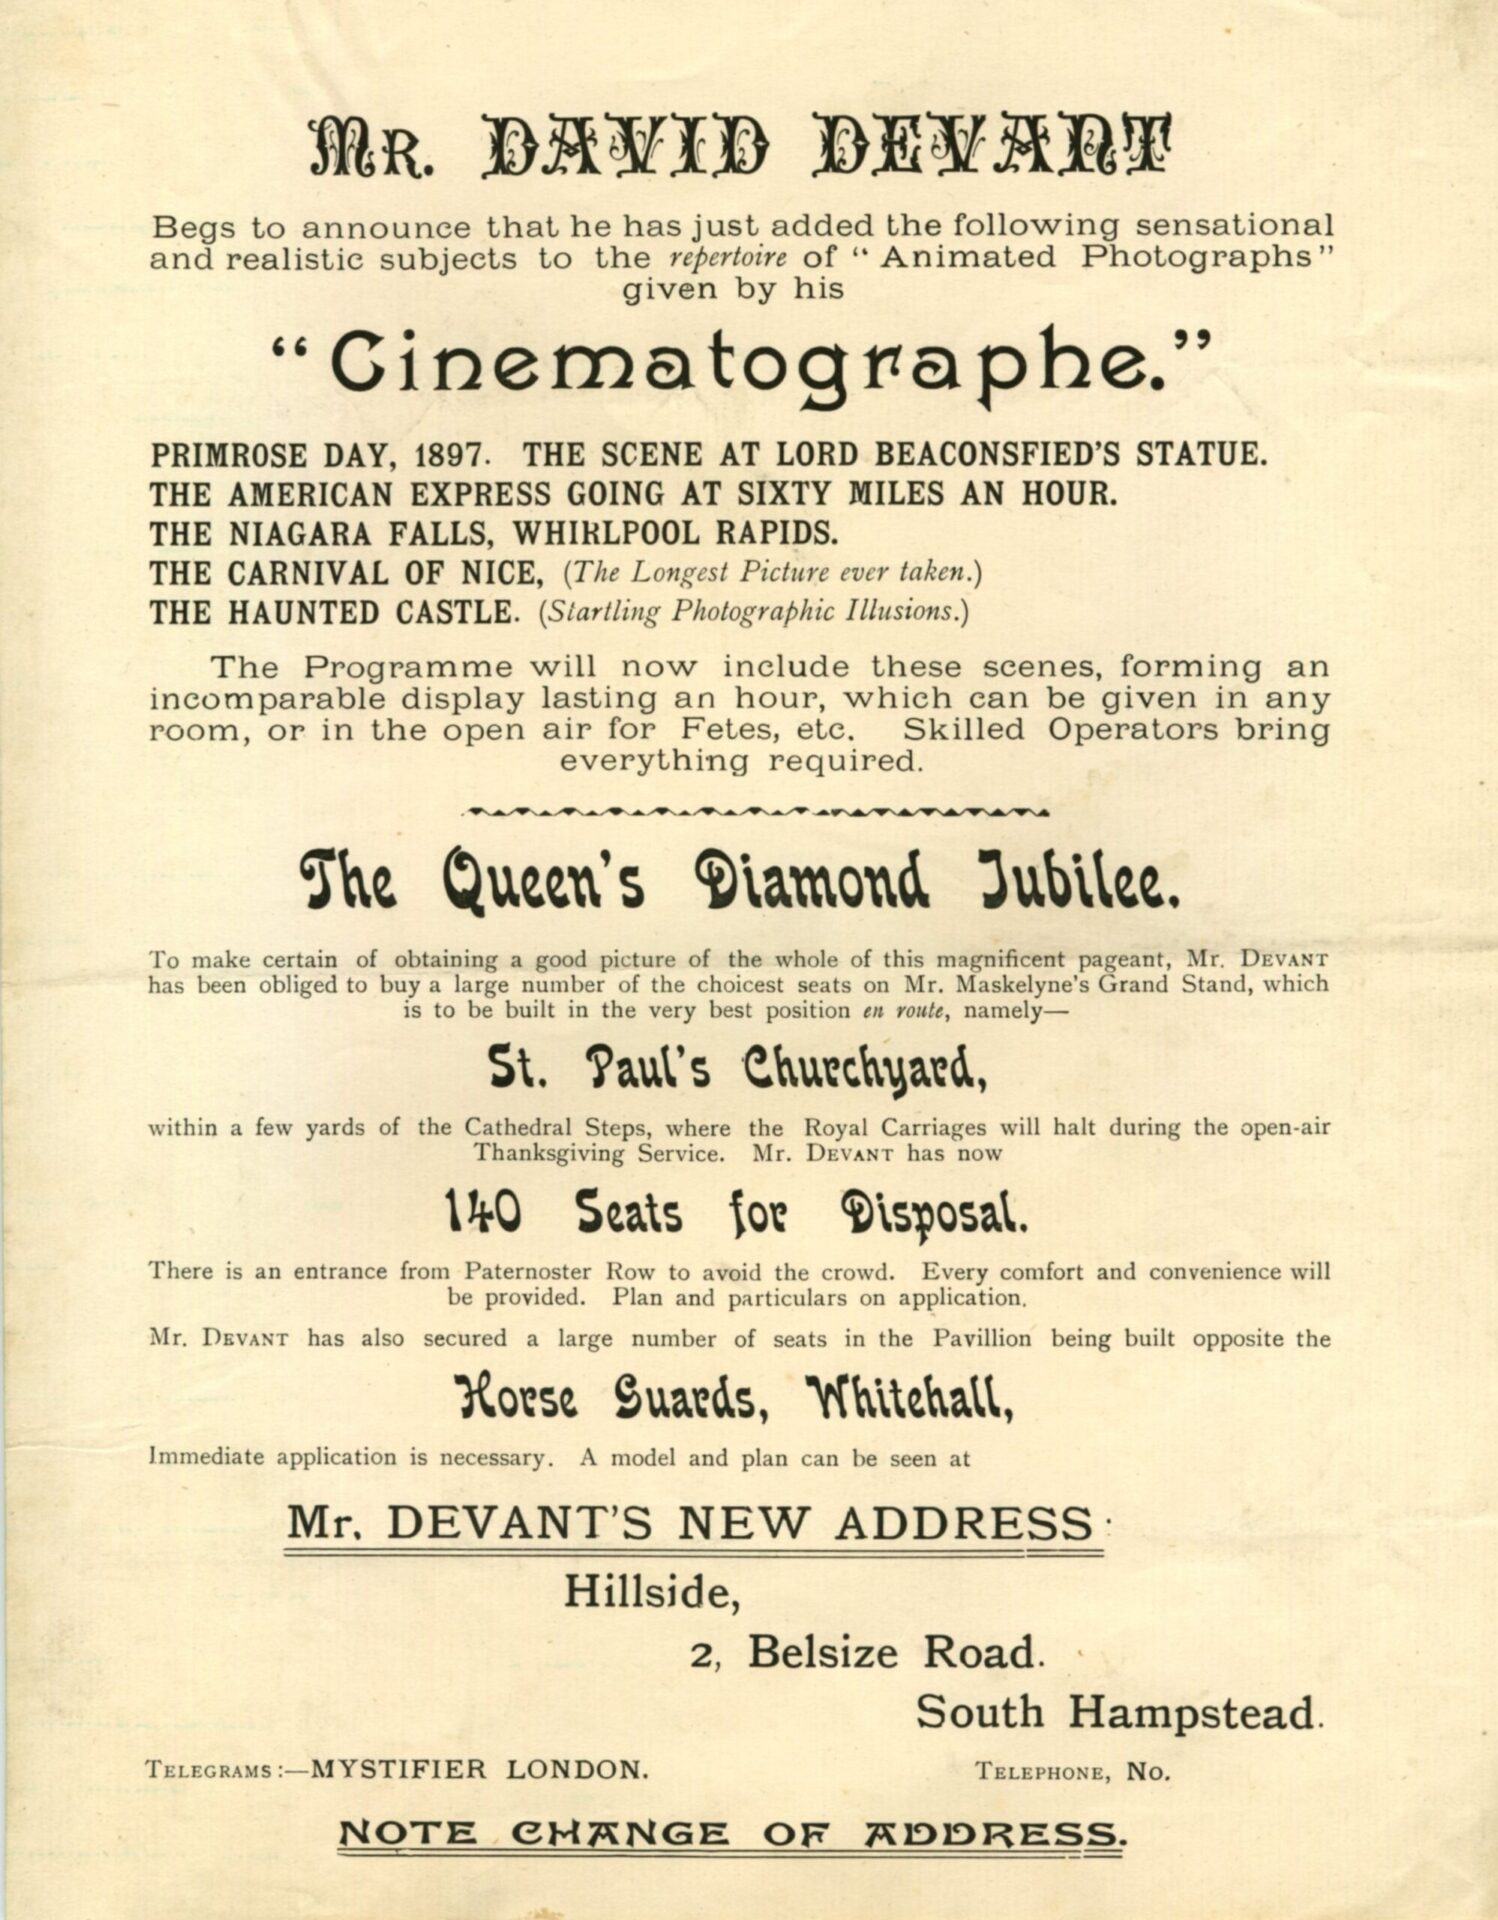 Devant’s ‘Cinematographe’ and sale of tickets for the Queen’s Diamond Jubilee procession